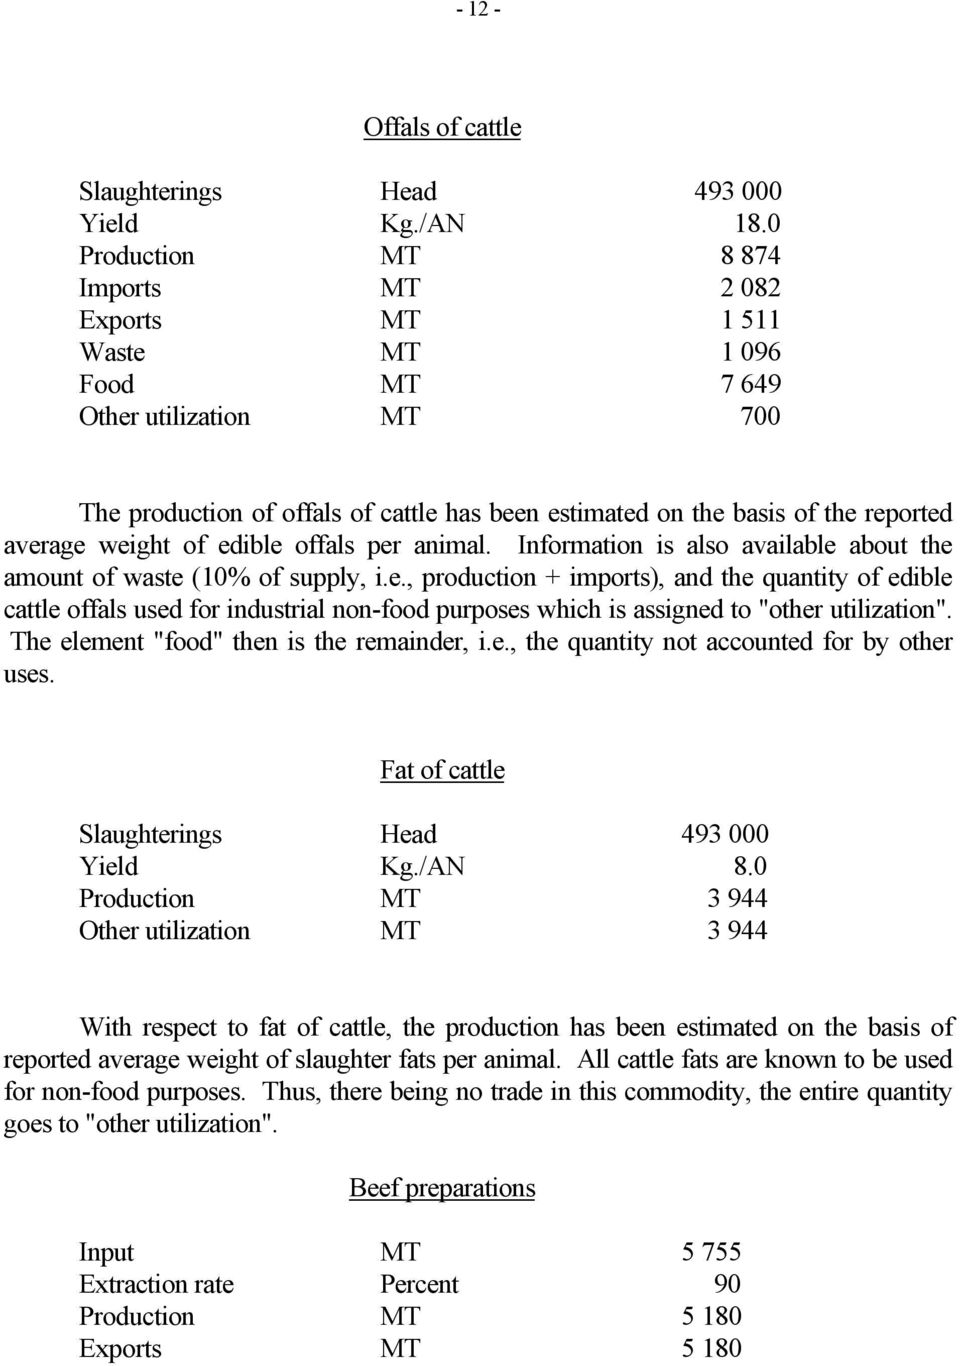 average weight of edible offals per animal. Information is also available about the amount of waste (10% of supply, i.e., production + imports), and the quantity of edible cattle offals used for industrial non-food purposes which is assigned to "other utilization".